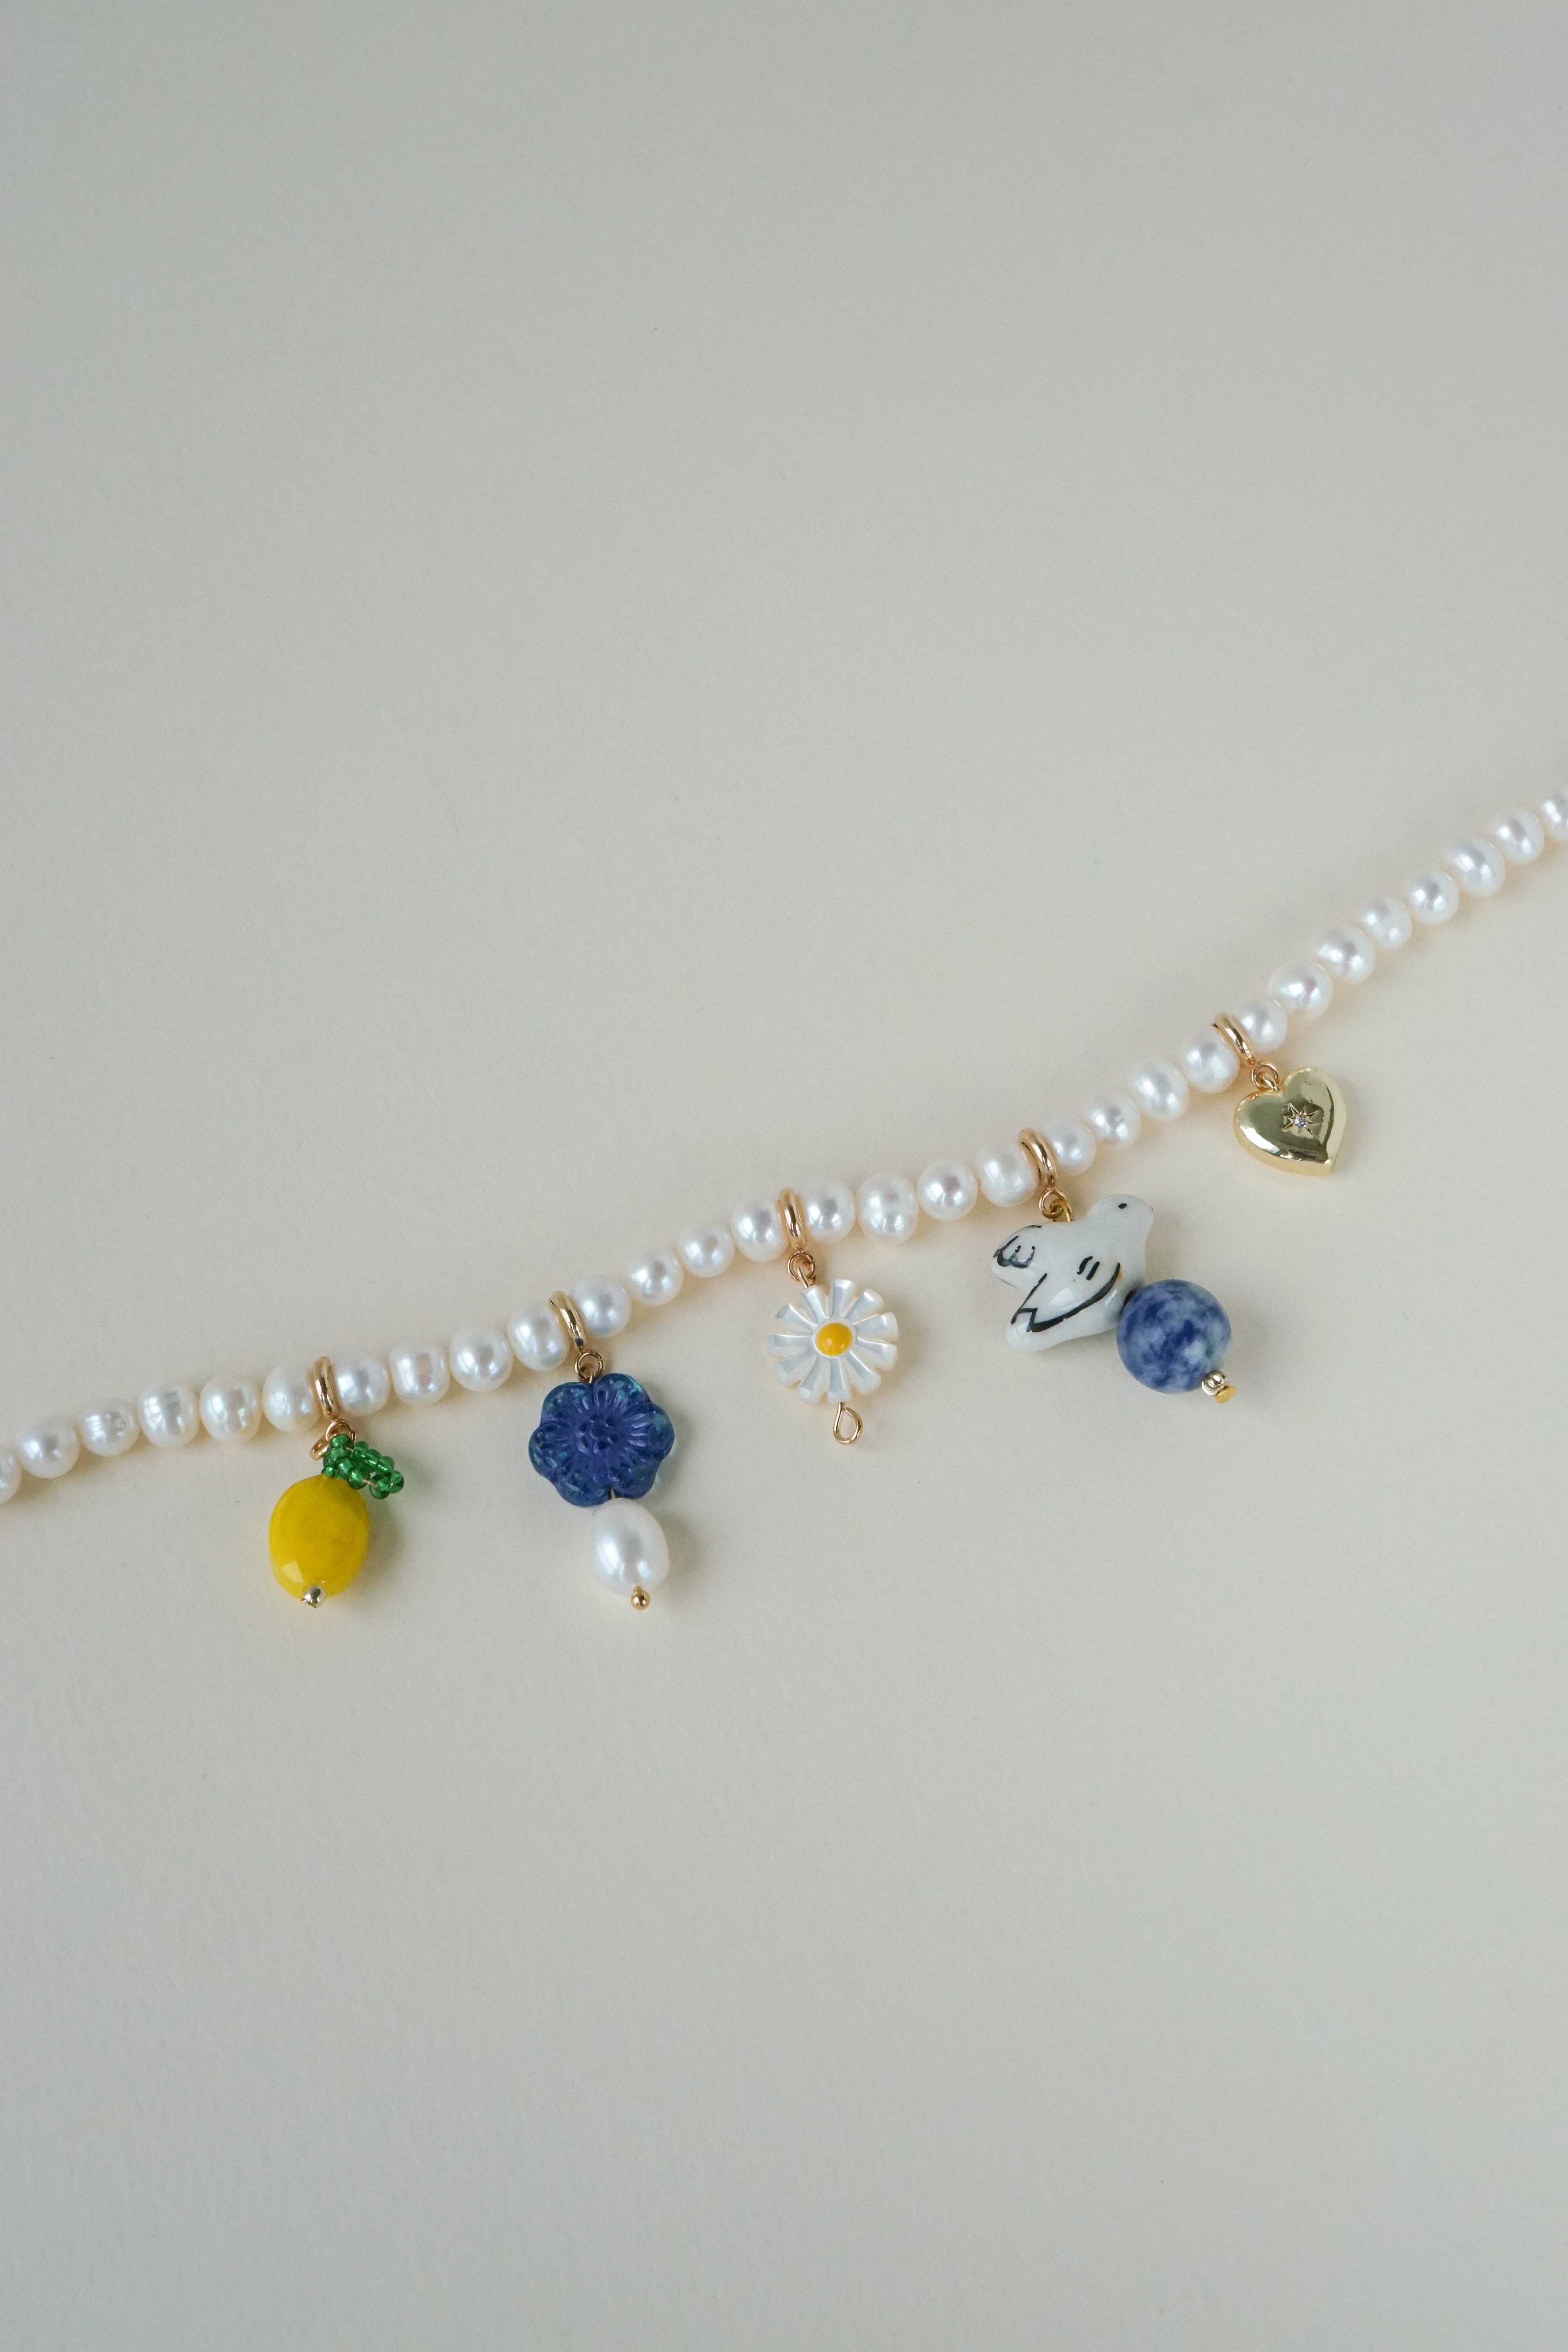 Garden Party Necklace (Set of 15 Charms)